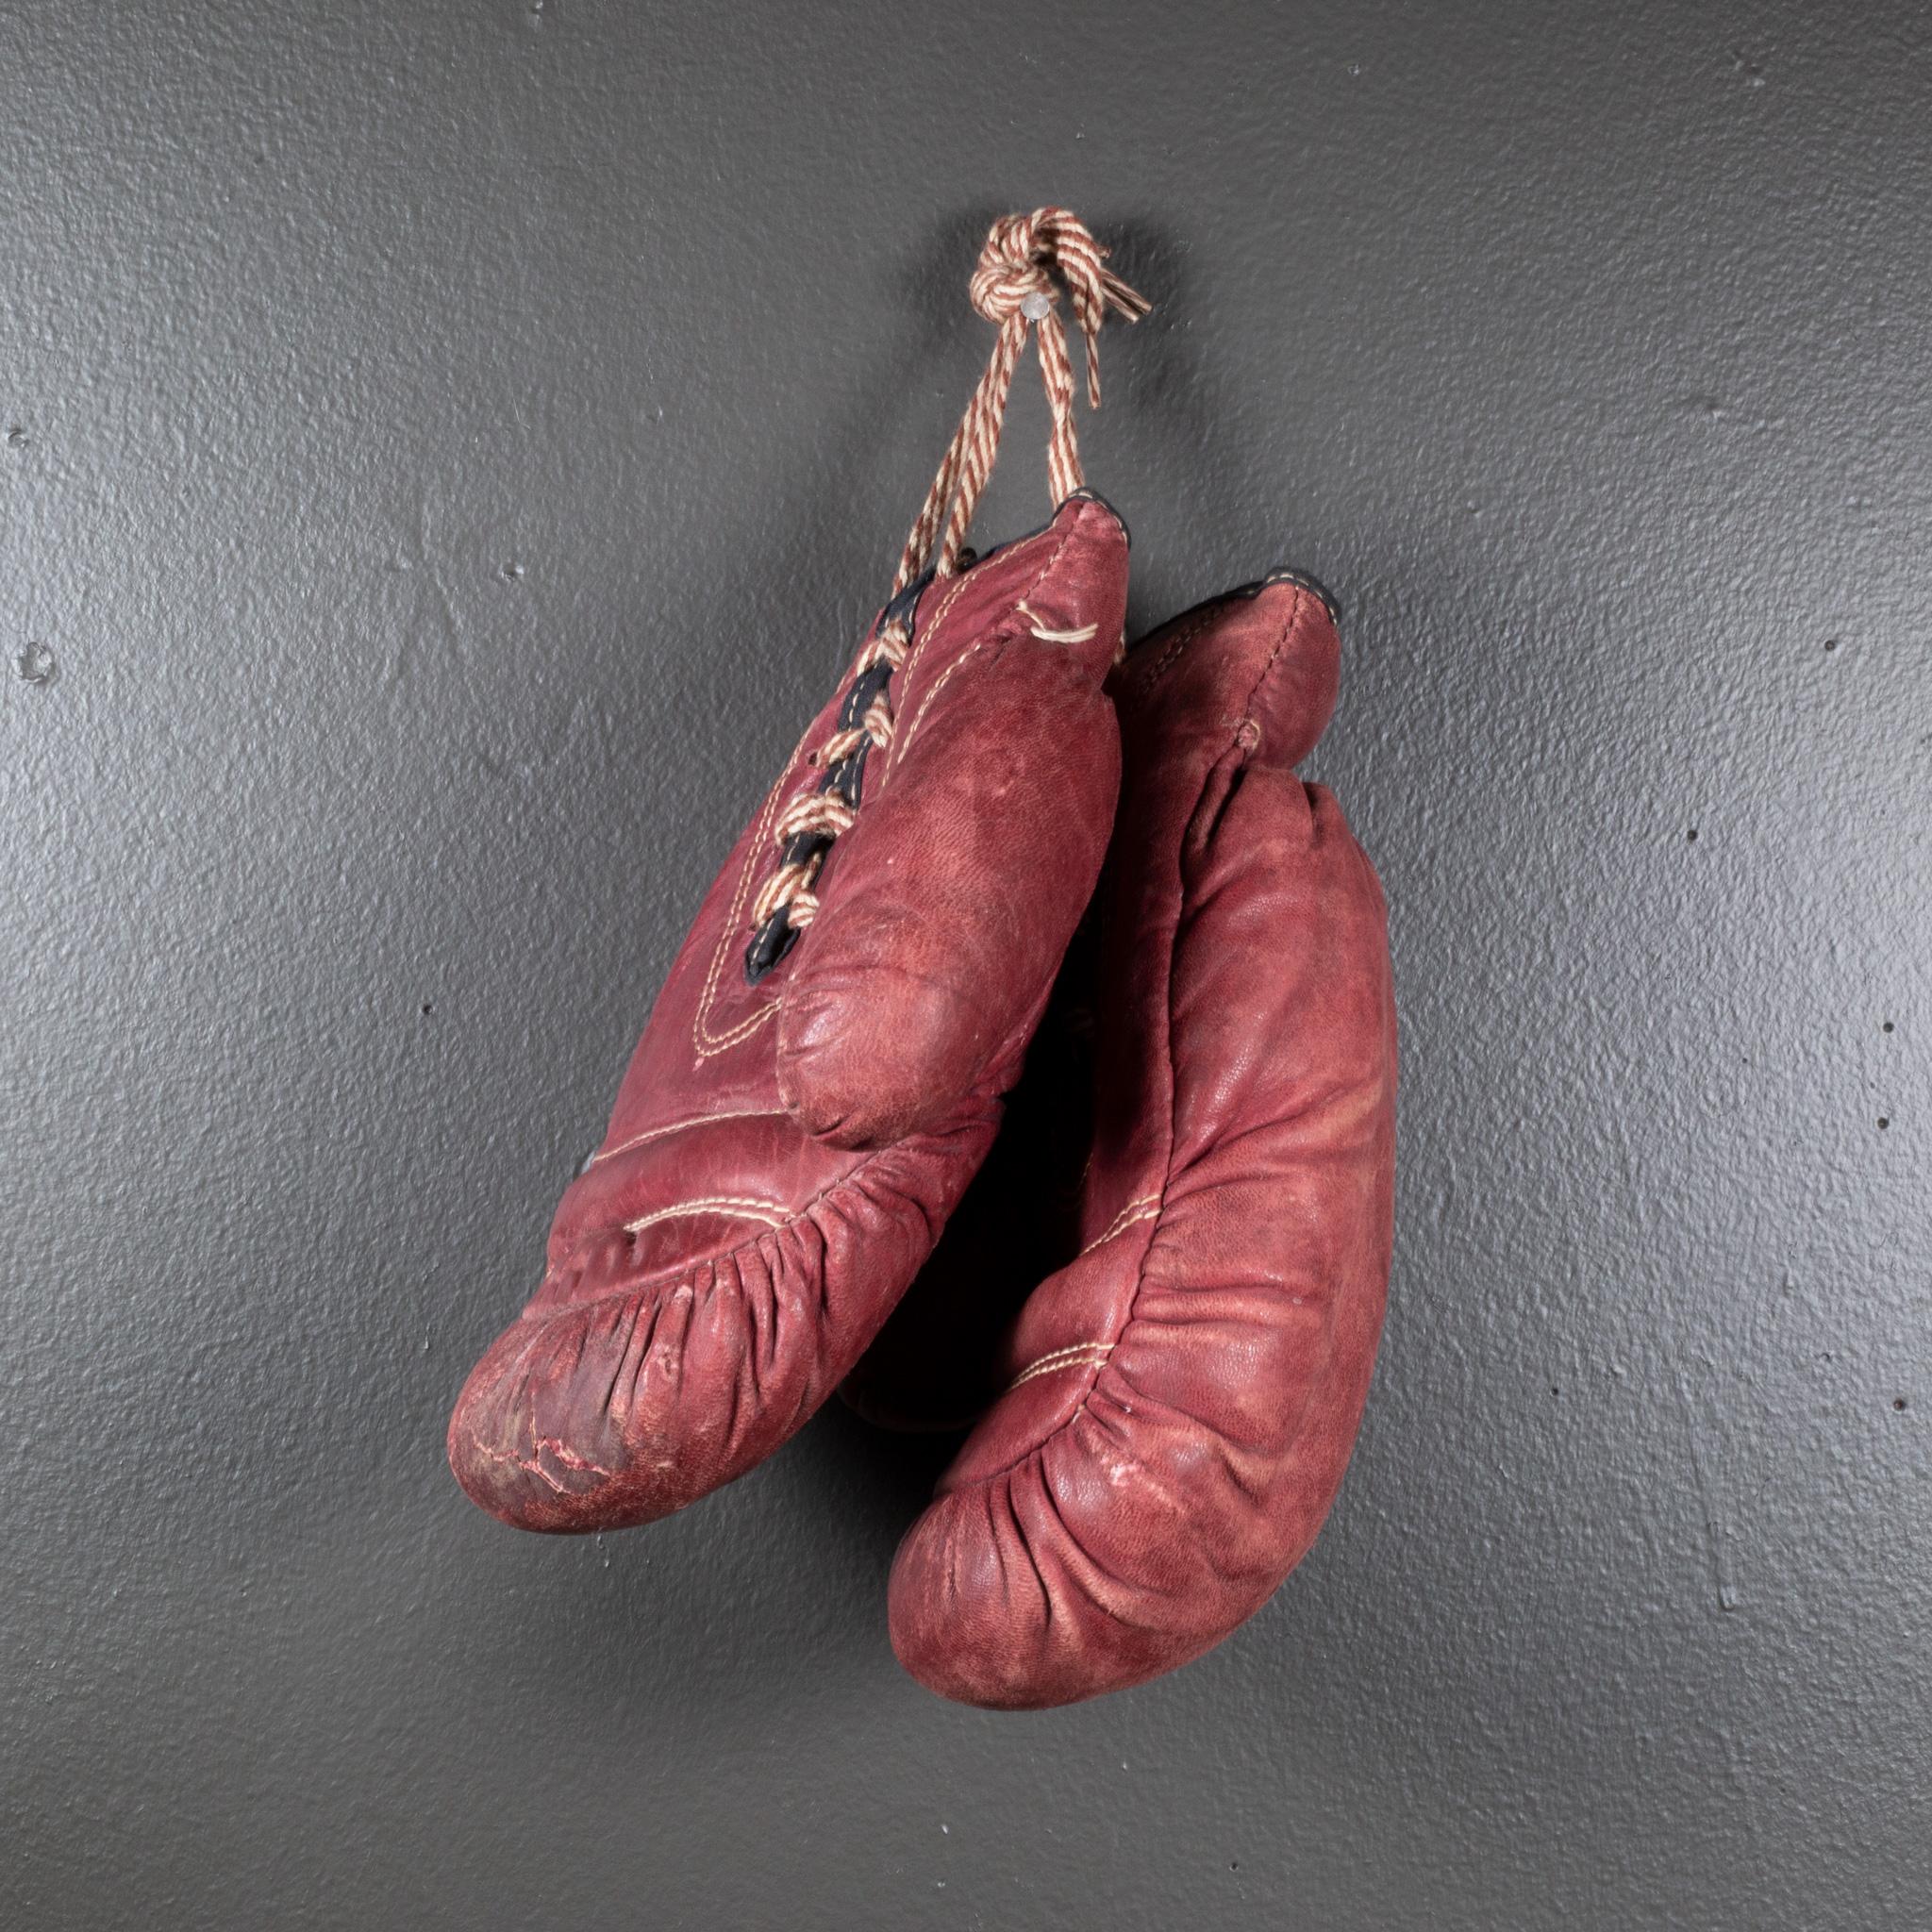 American Children's Leather Boxing Gloves c.1950-1960